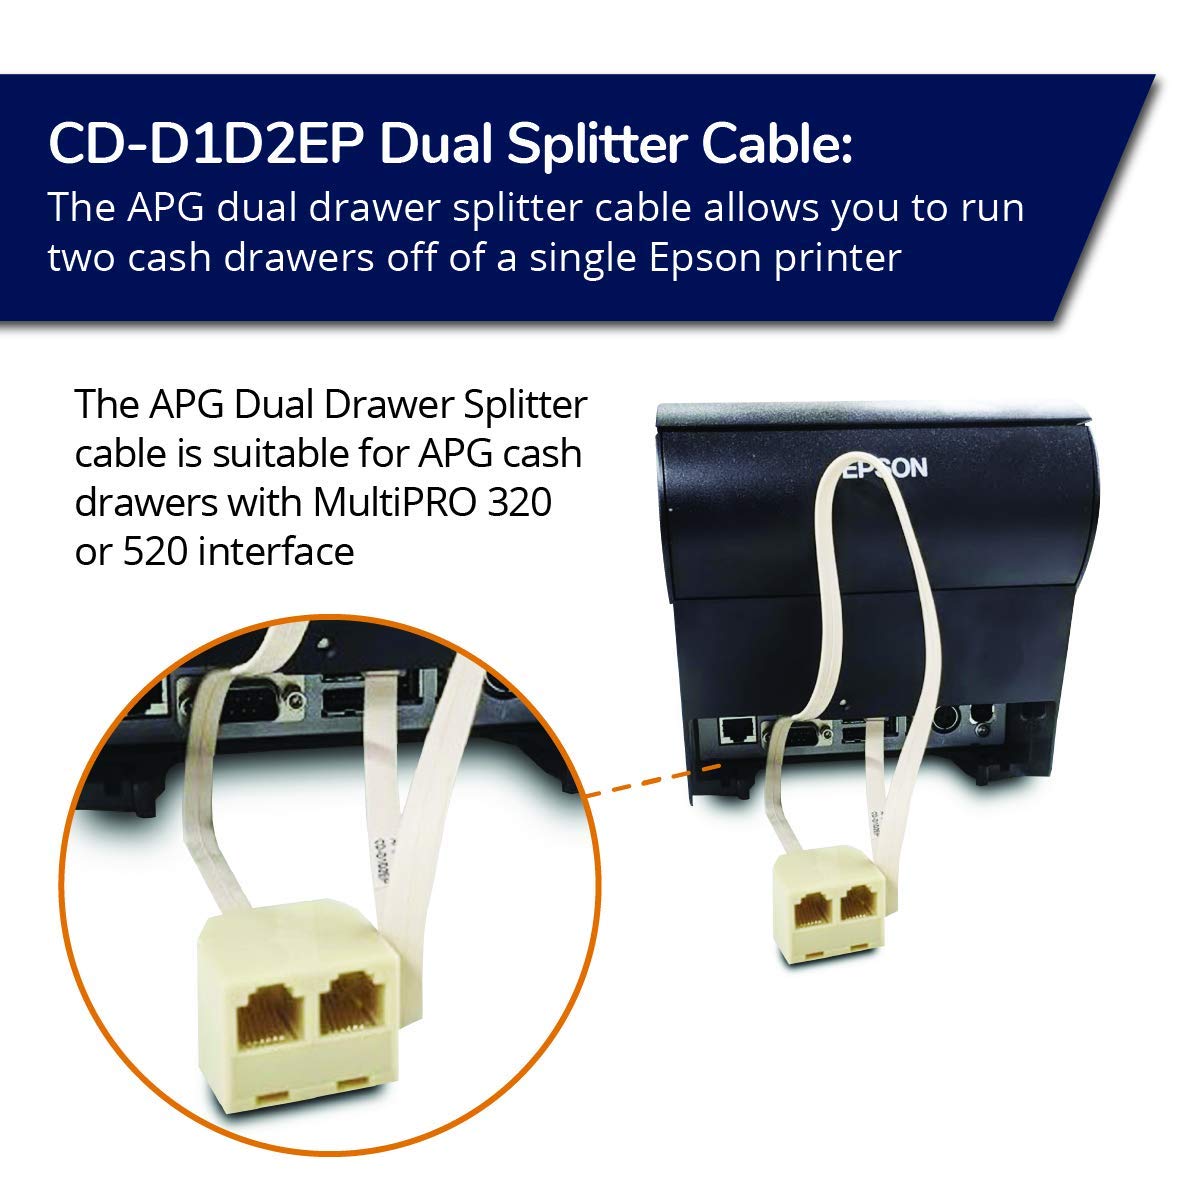 APG CD-D1D2EP Dual Drawer RJ-12 Male Splitter Cable for Epson Printers CDD1D2EP - image 3 of 7